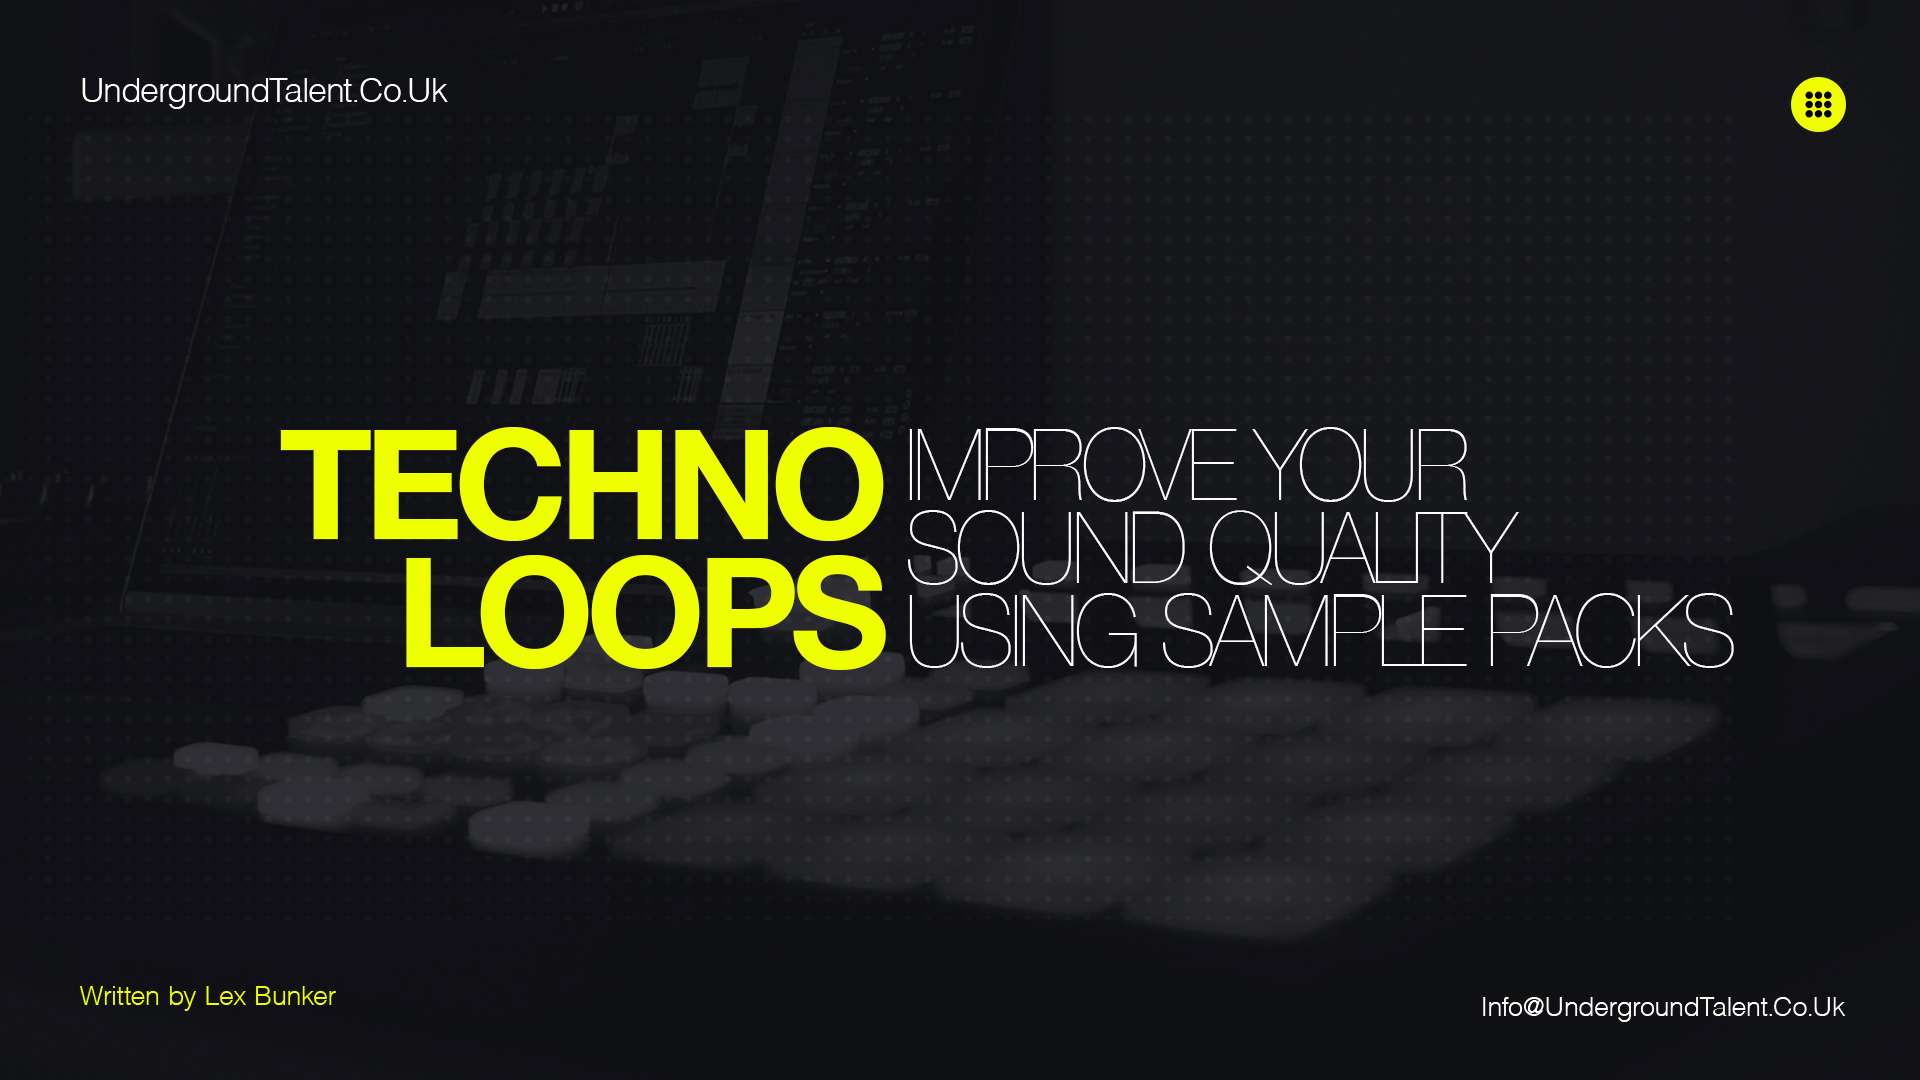 Loops: Improve Your Sound Quality Using Sample Packs